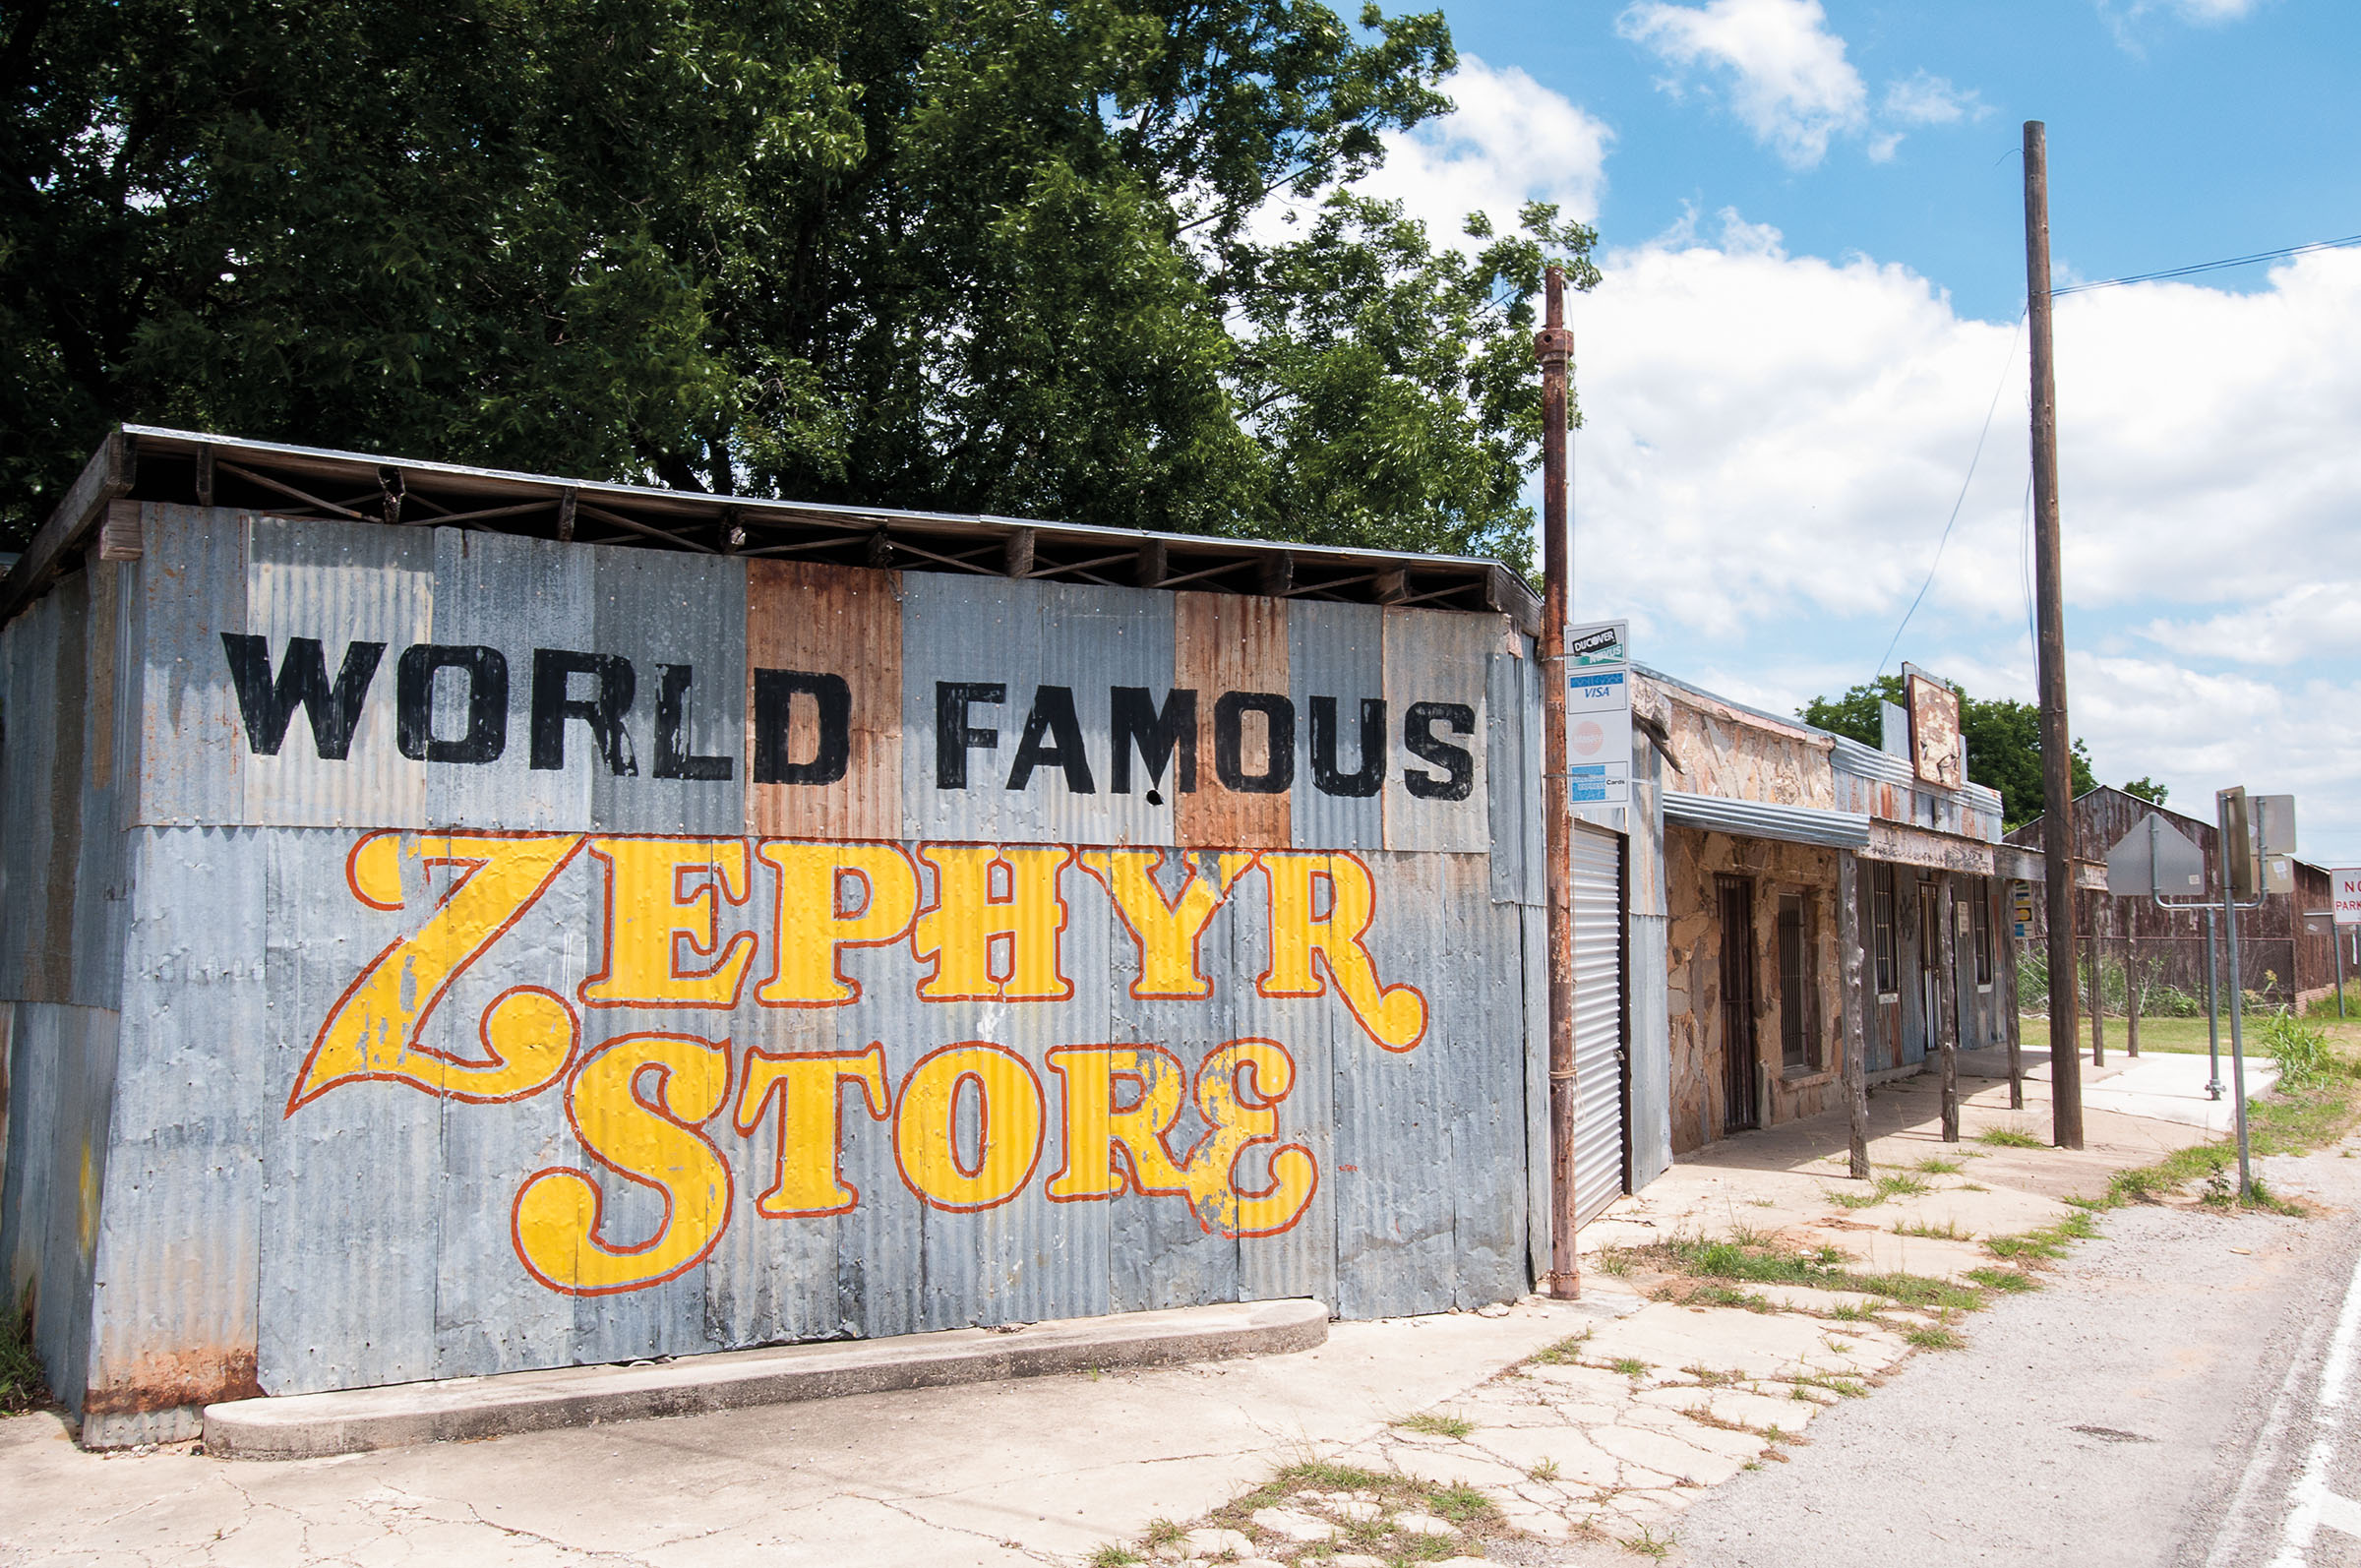 The exterior of a building with metal siding reading "World Famous Zephyr Store"